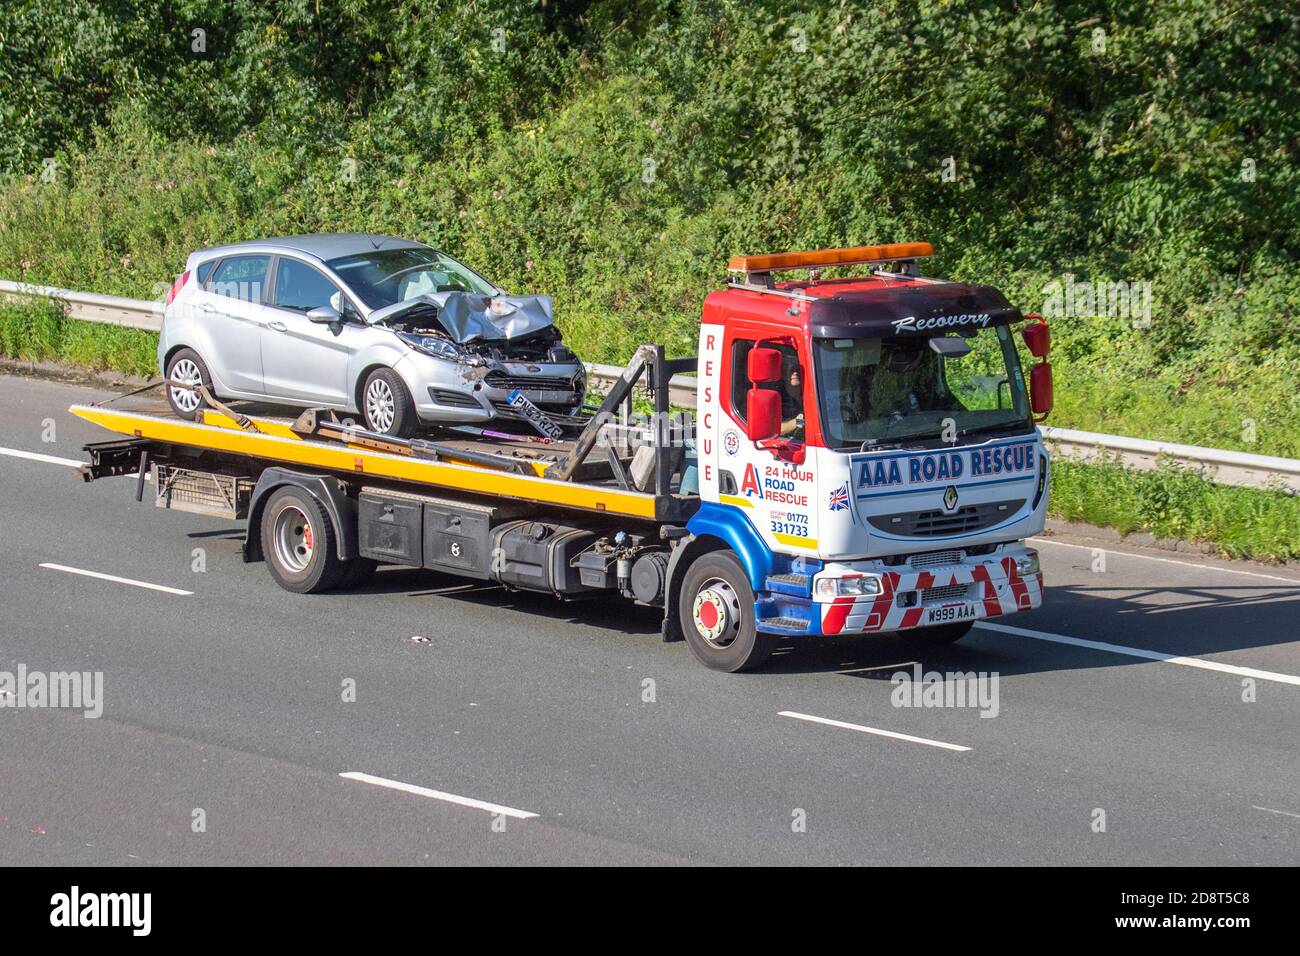 AAA Road Rescue (Leyland). 24 hour roadside breakdown service. Haulage delivery trucks, lorry, transportation, truck, AUTO carrier,  vehicle, European commercial transport, industry, M61 at Manchester, UK Stock Photo